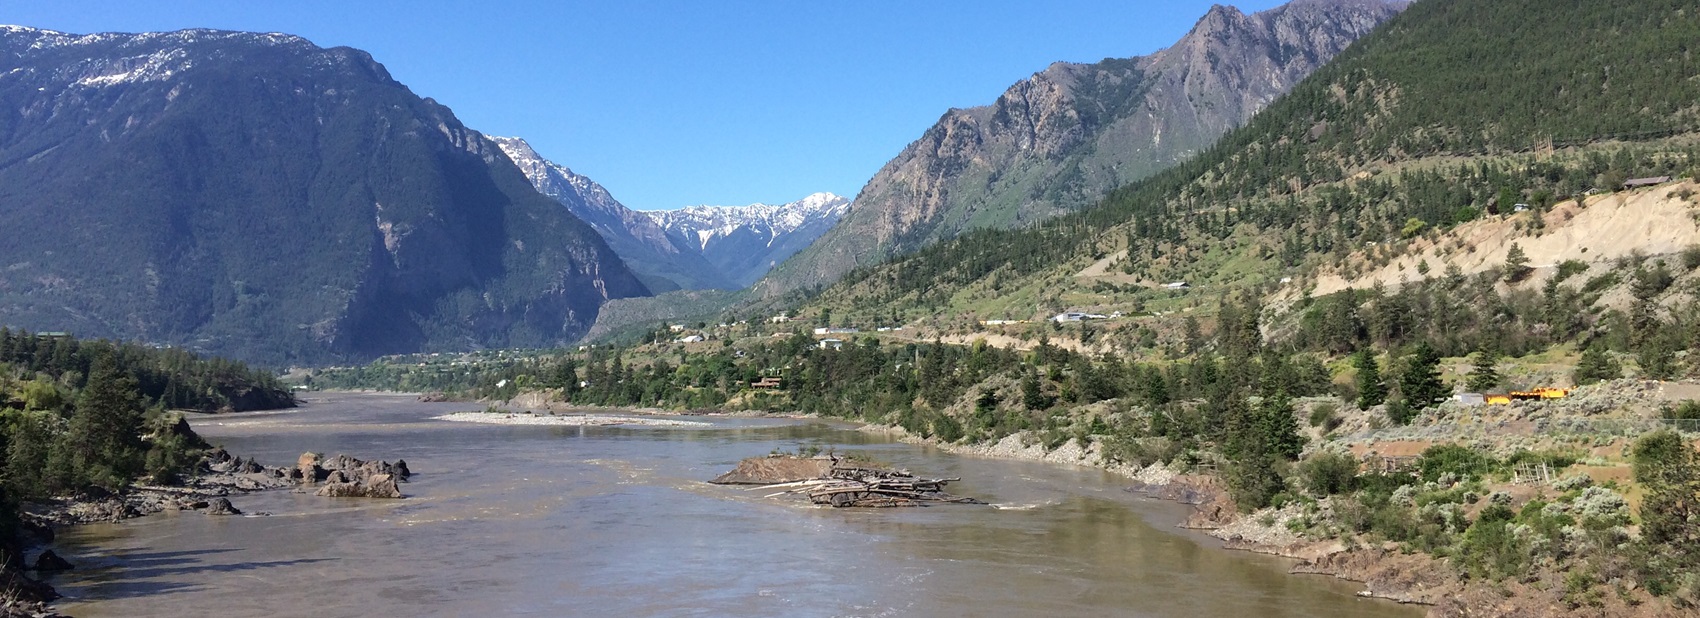 Lillooet in the Coast Mountains, British Columbia, Canada